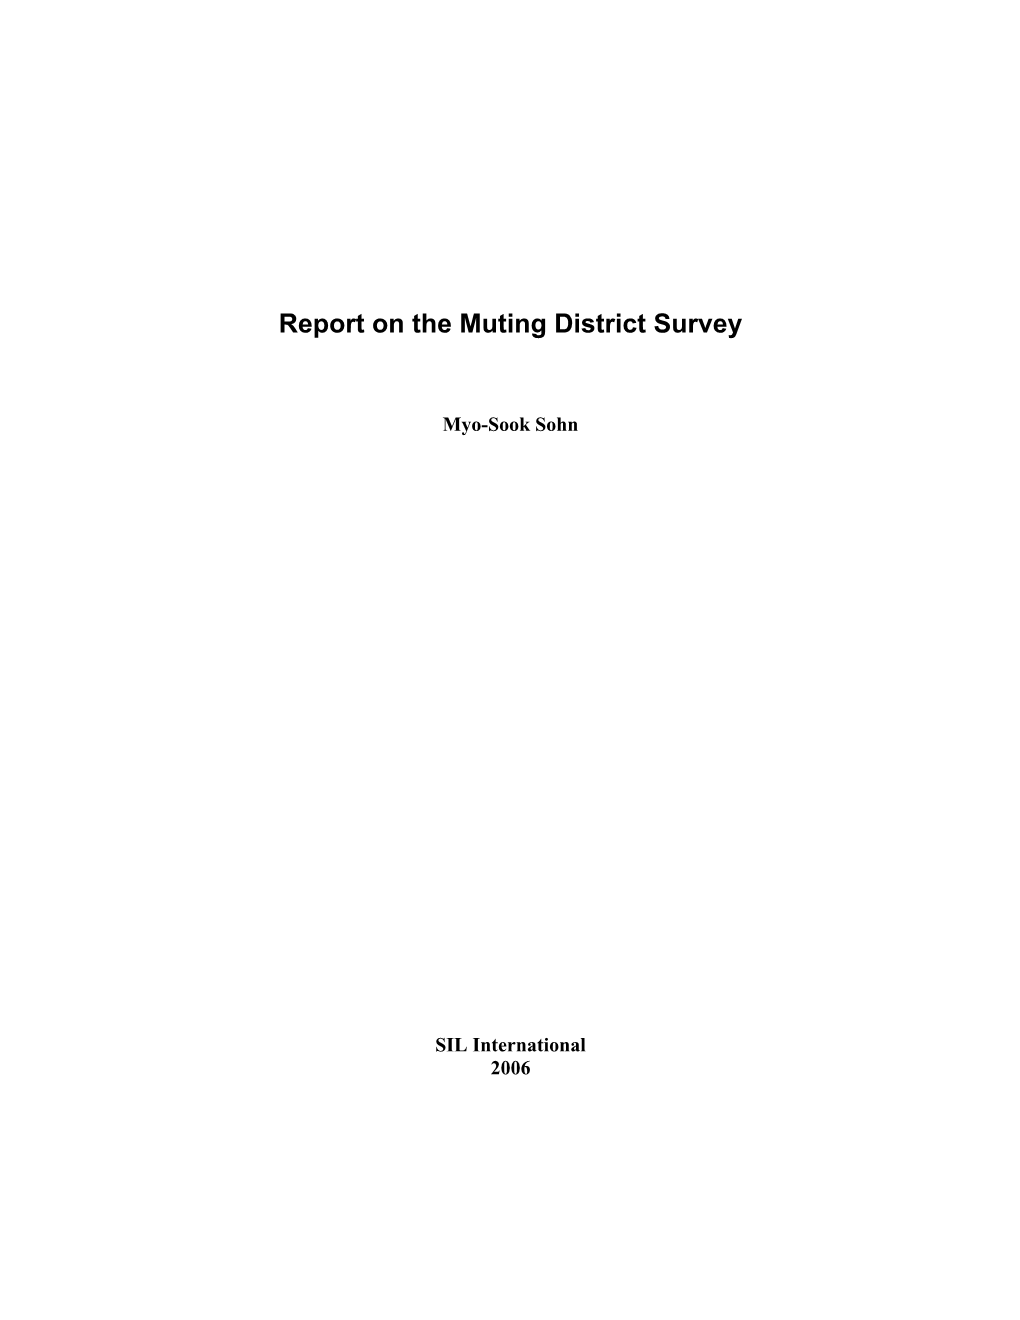 Report on the Muting District Survey